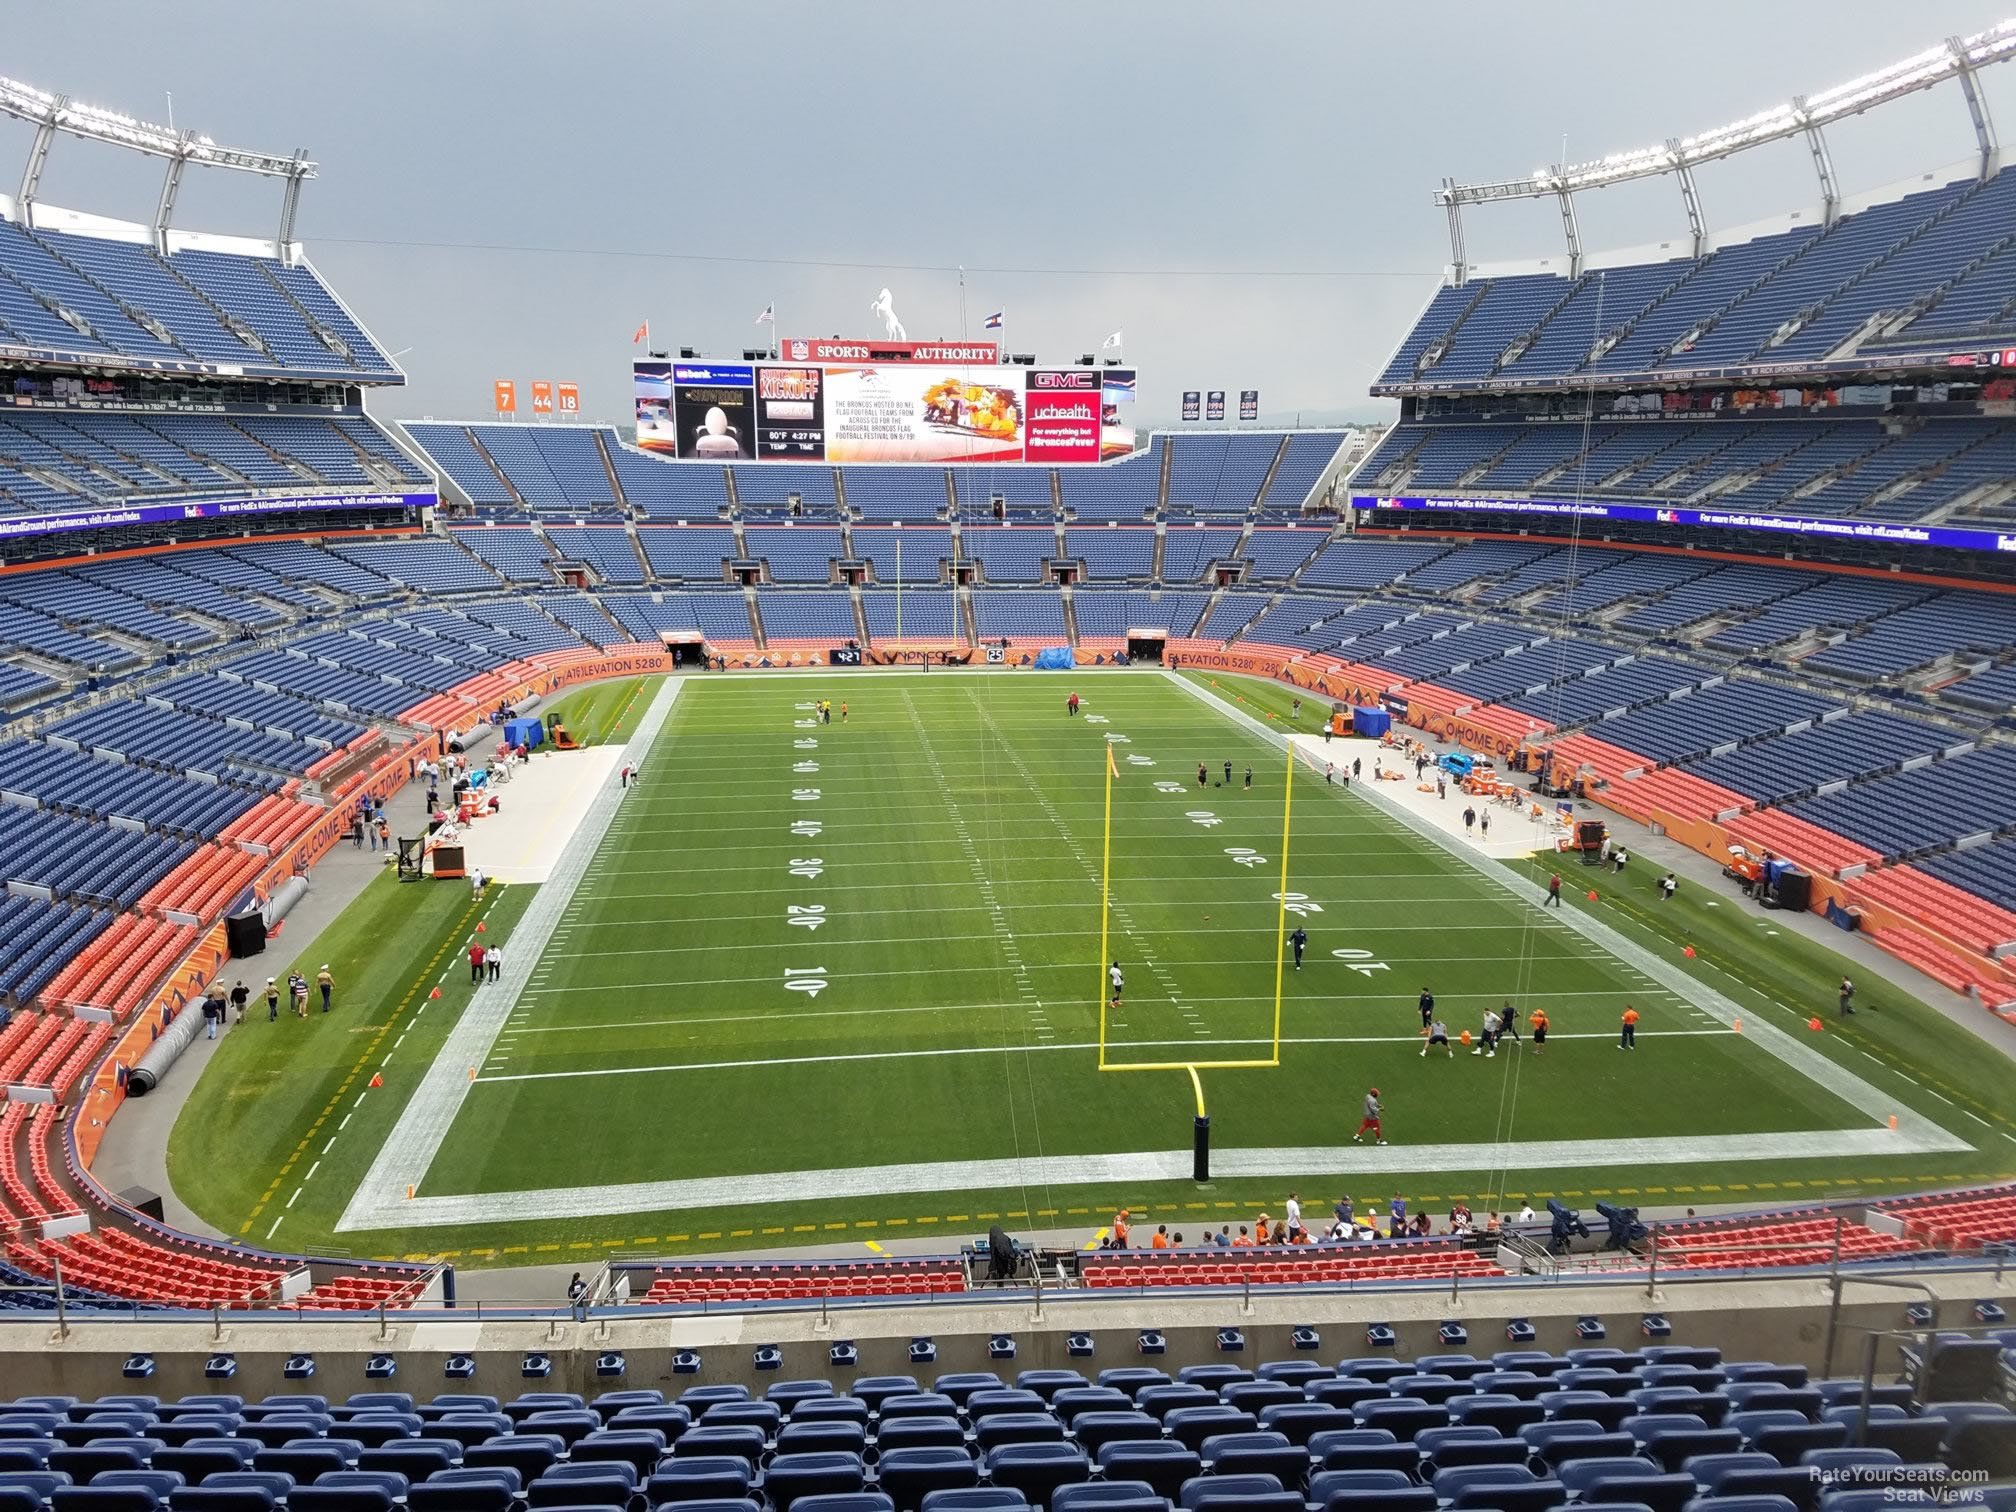 section 324, row 12 seat view  - empower field (at mile high)